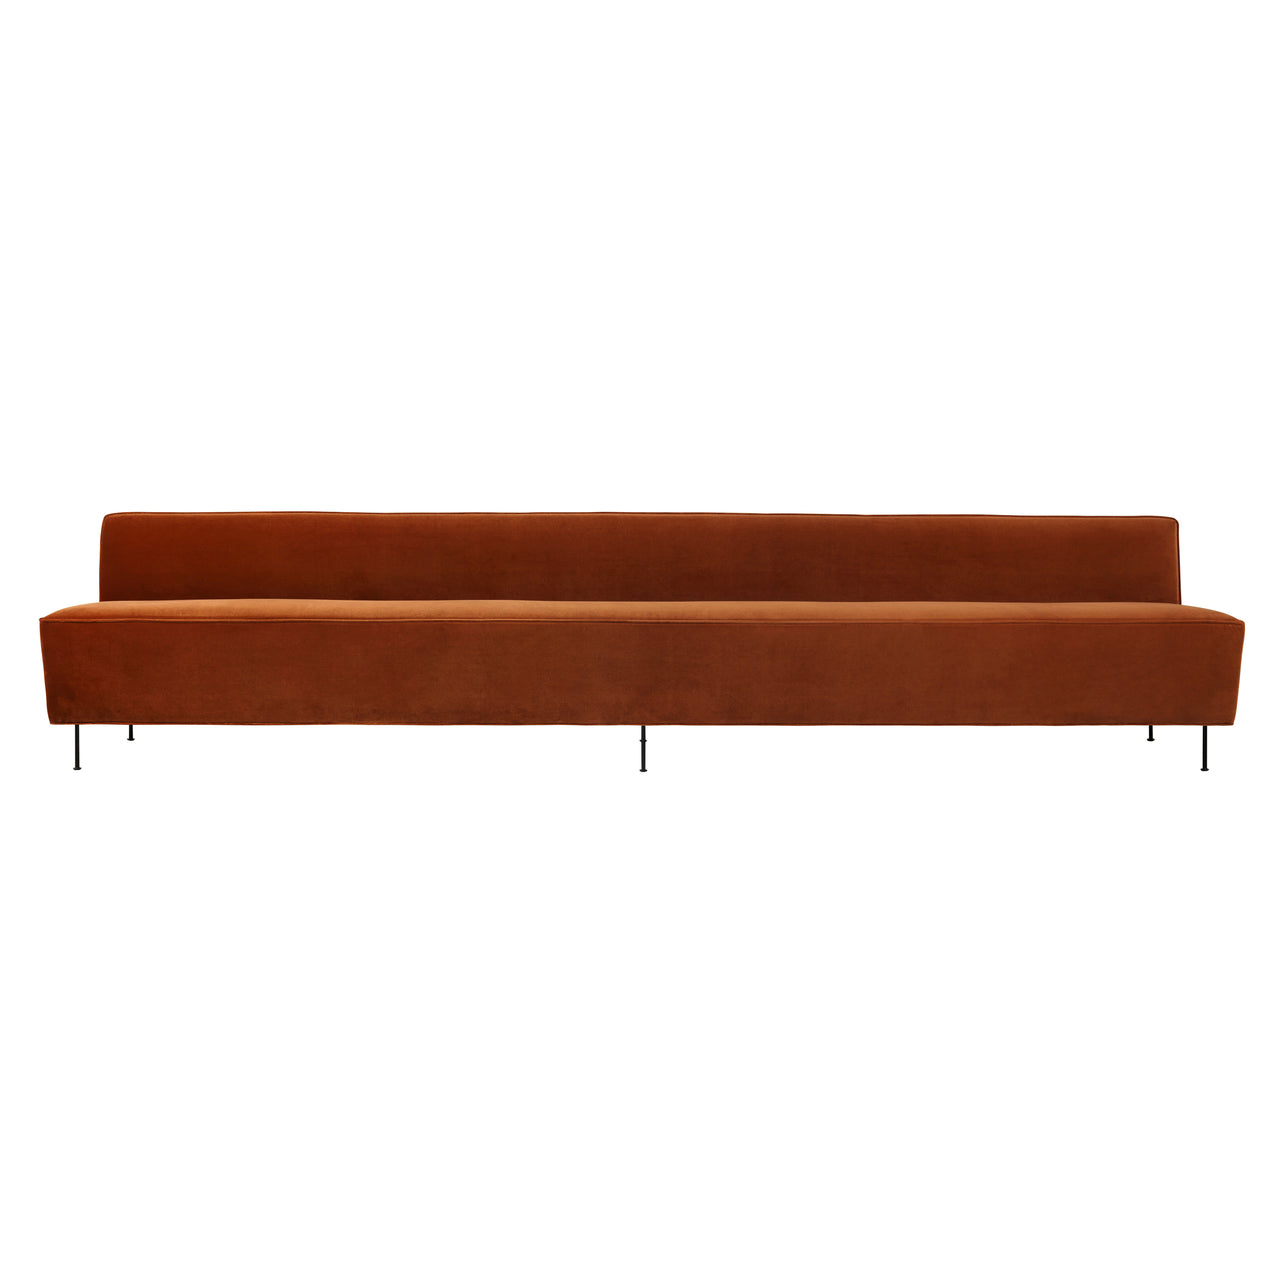 Modern Line Sofa: Dining Height + Extra Large - 137.8